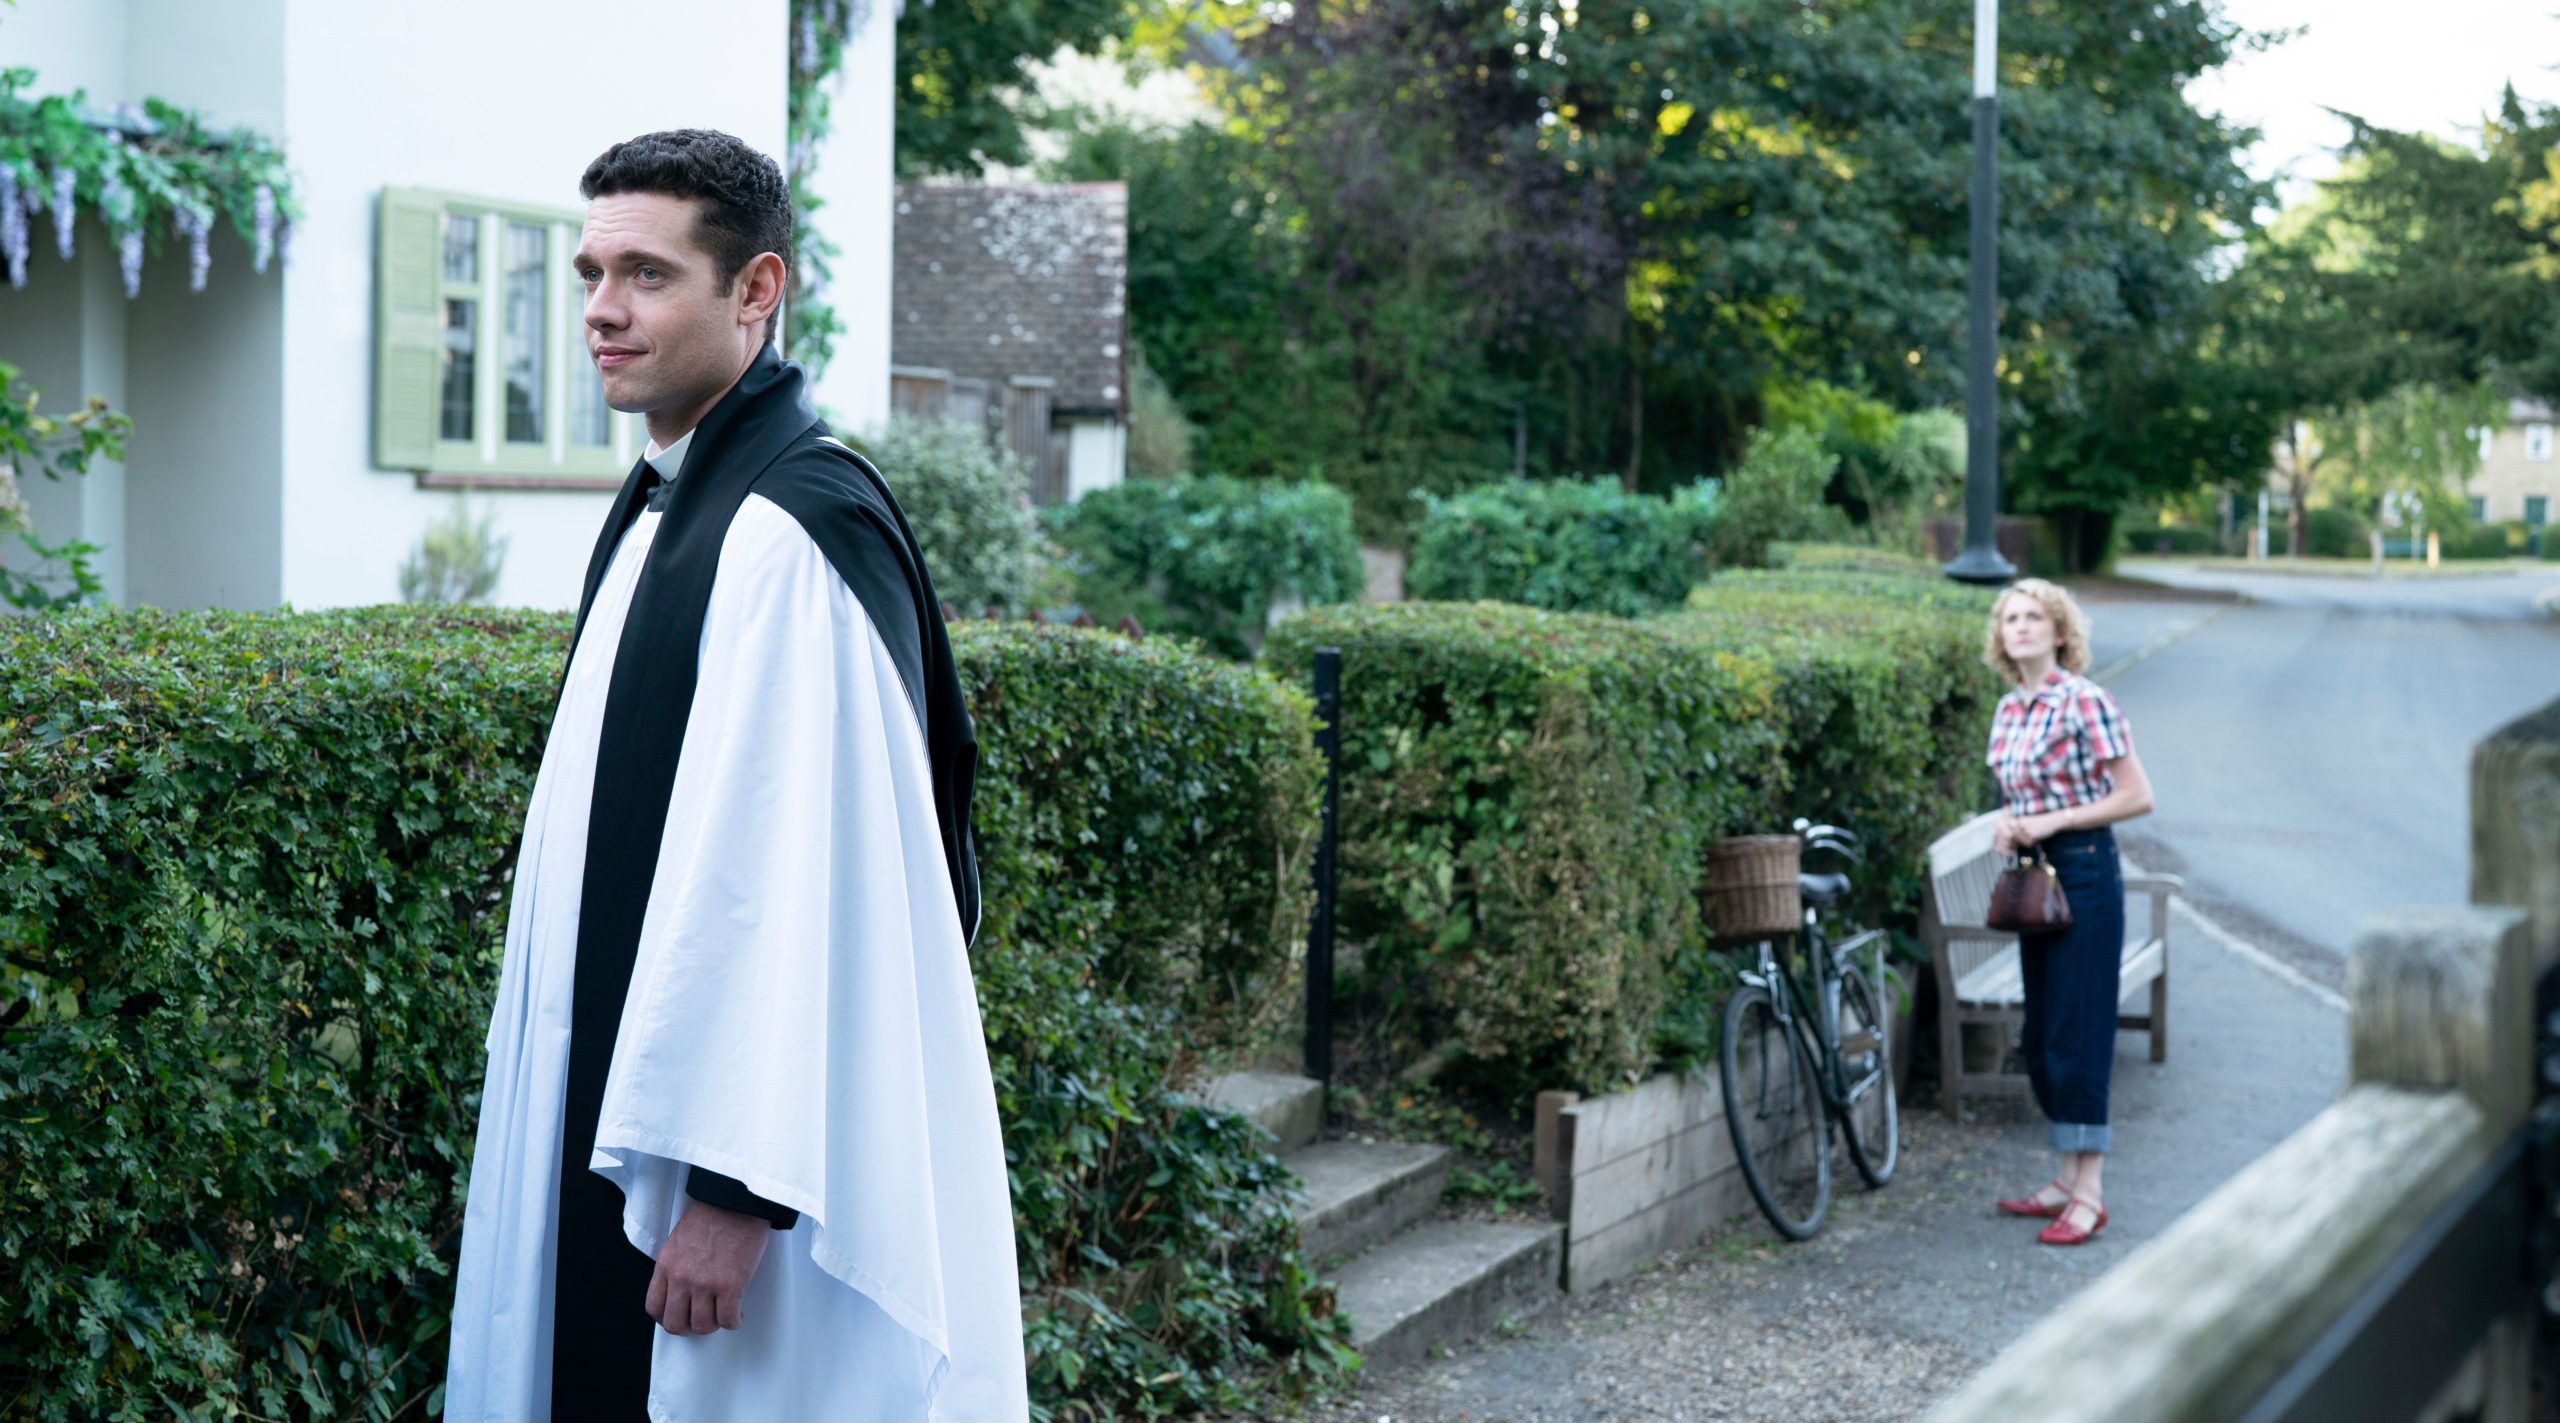 MASTERPIECE Mystery!
Grantchester, Season 7
Sundays, July 10 - August 14 at 9/8c on PBS

Episode Four
Sunday, July 31, 2022; 9-10pm ET on PBS
A member of Will’s own congregation is found murdered just before a church fundraising event. It quickly becomes clear that the victim was not quite the upstanding member of the community Will believed him to have been.

Shown from left to right: Tom Brittney as Will Davenport and Charlotte Ritchie as Bonnie Evans

For editorial use only.

(C) Kudos Film and TV Ltd